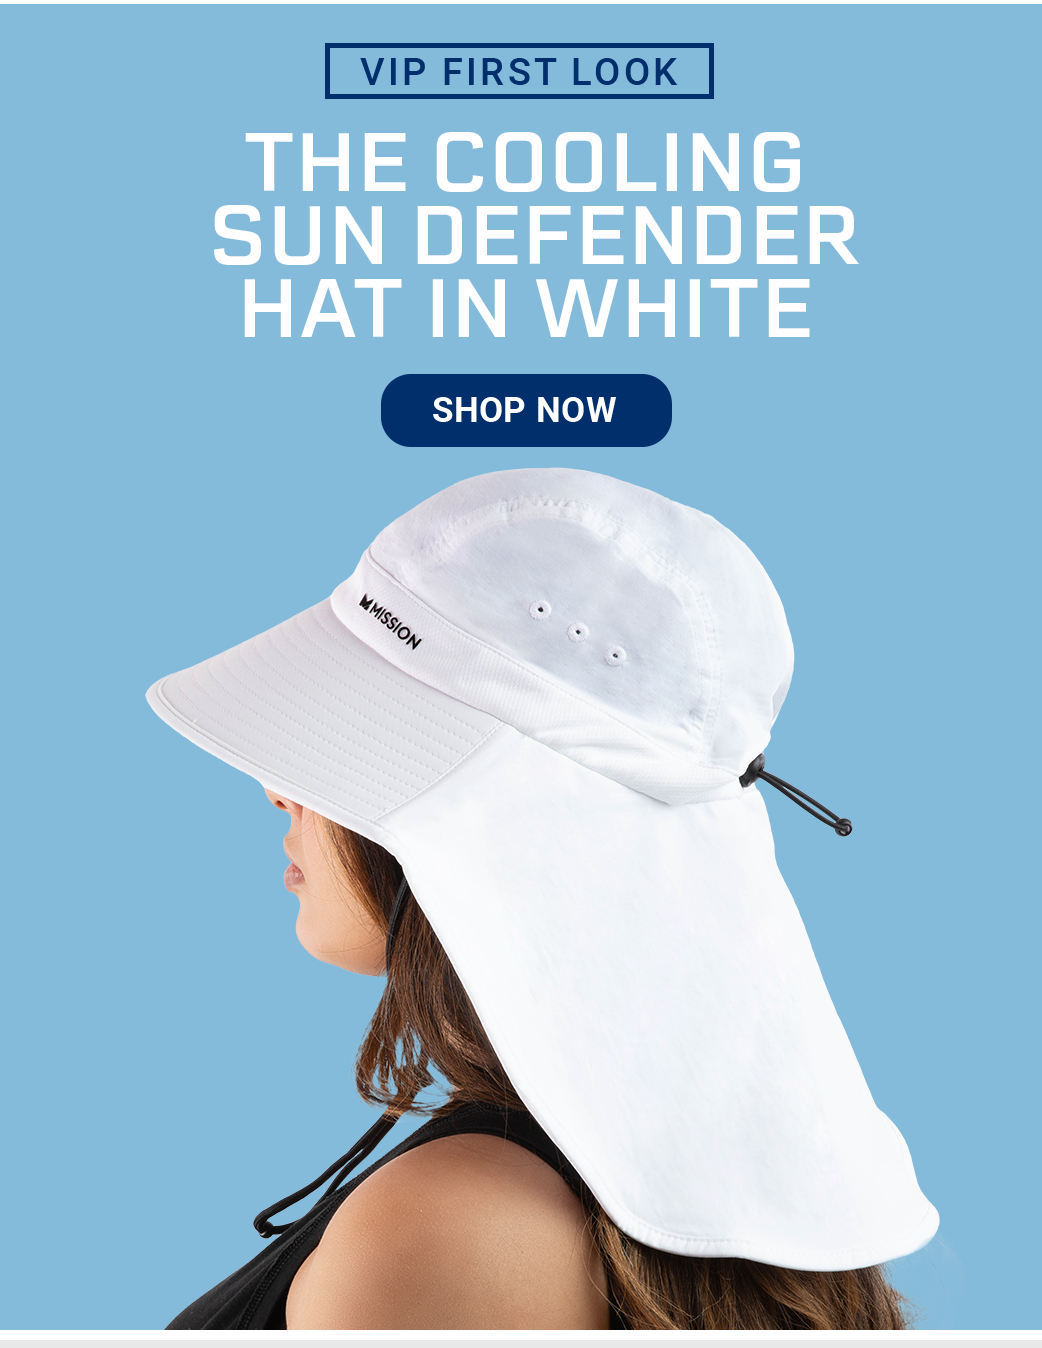 VIP FIRST LOOK The Cooling Sun Defender Hat in White [ SHOP NOW]